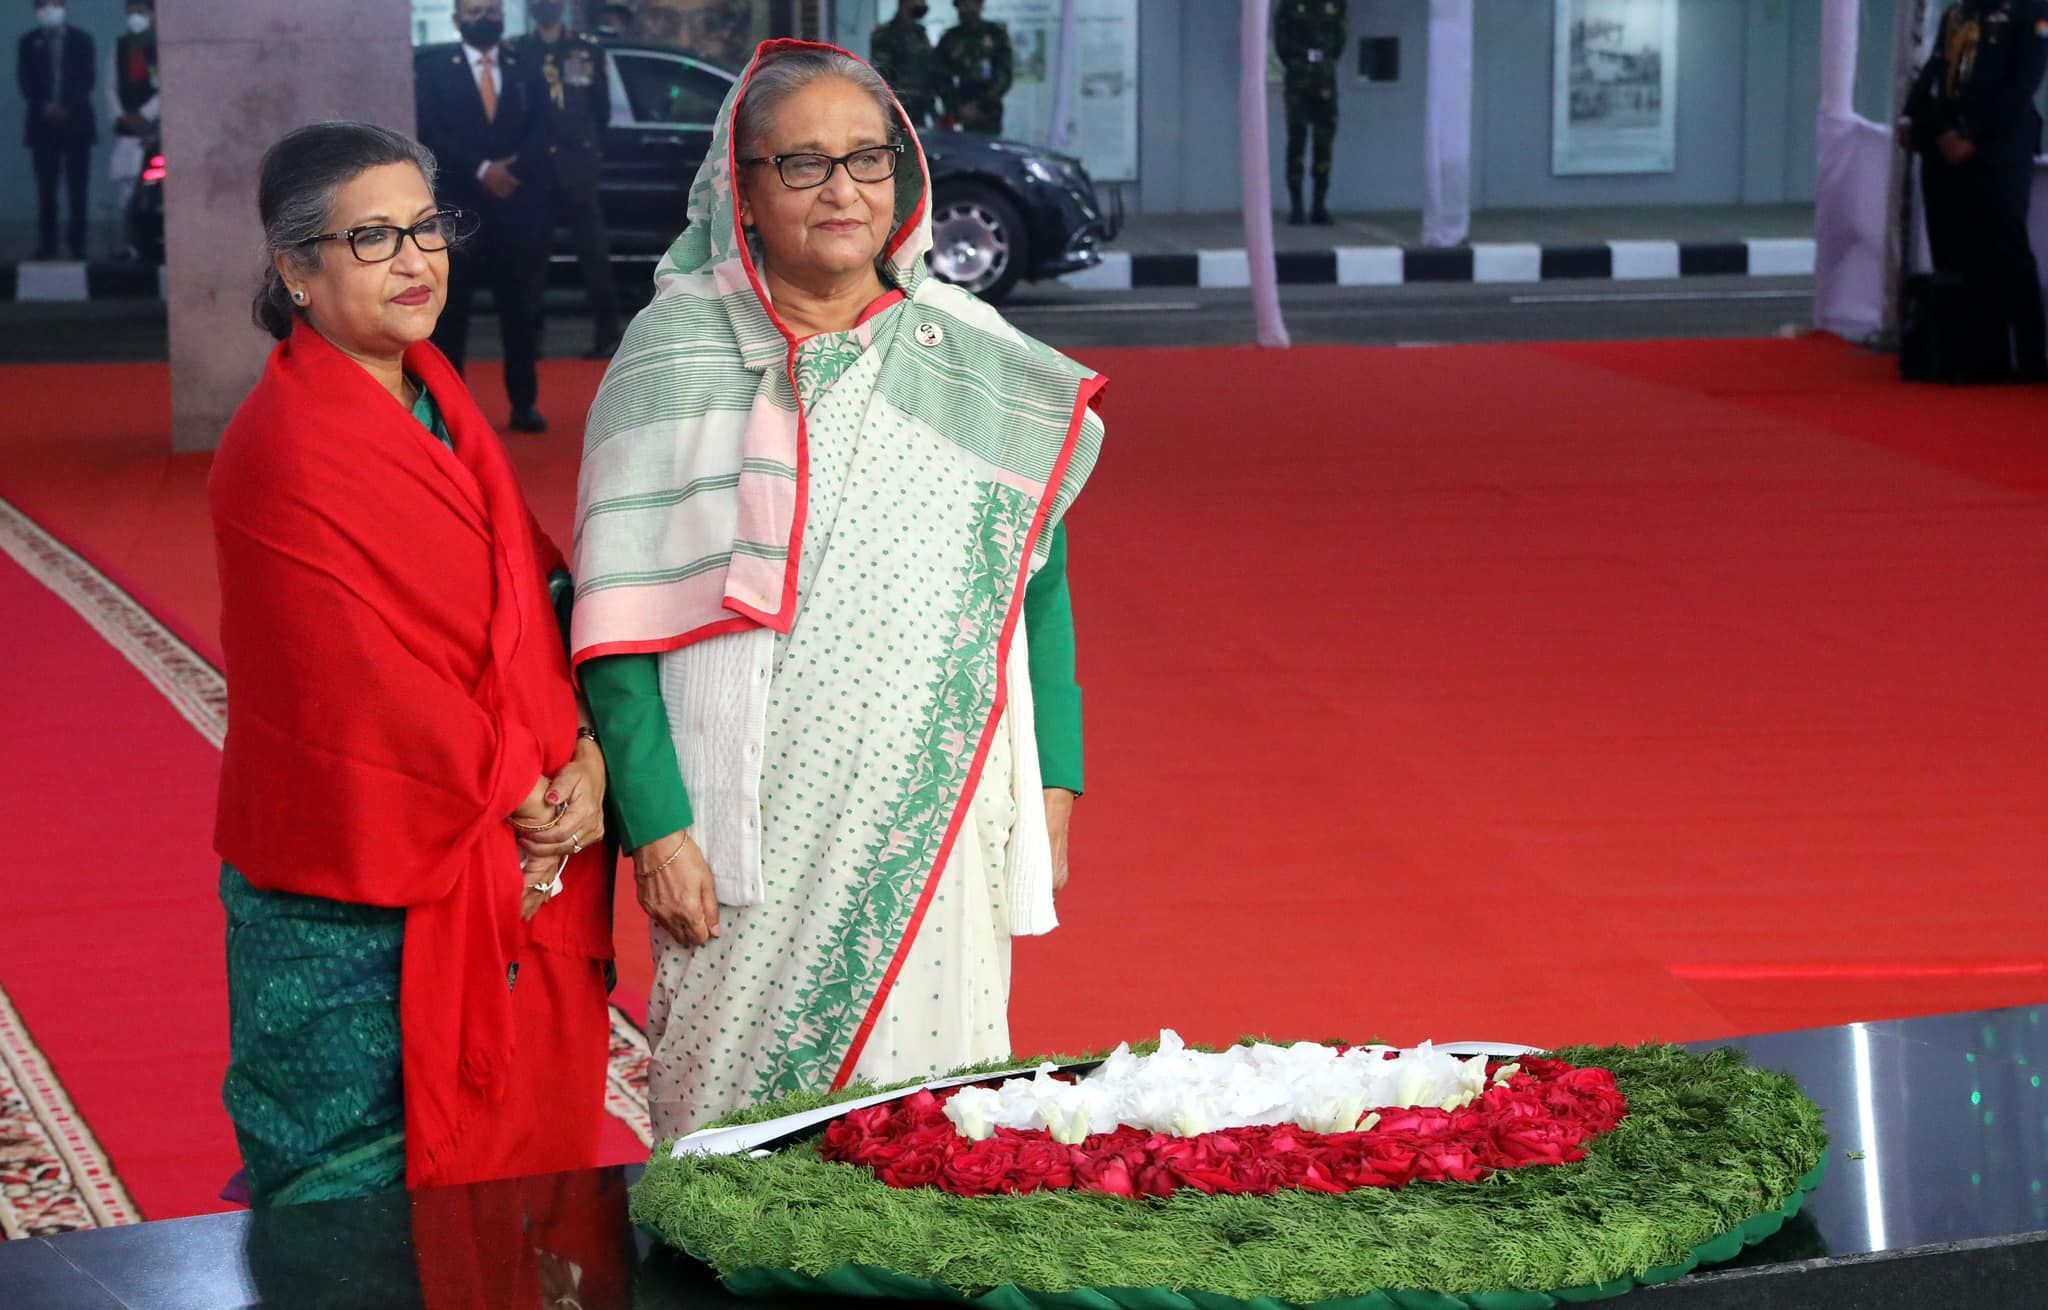 Sheikh Hasina and Sheikh Rehna stood there in silence for a while || Photo: BSS